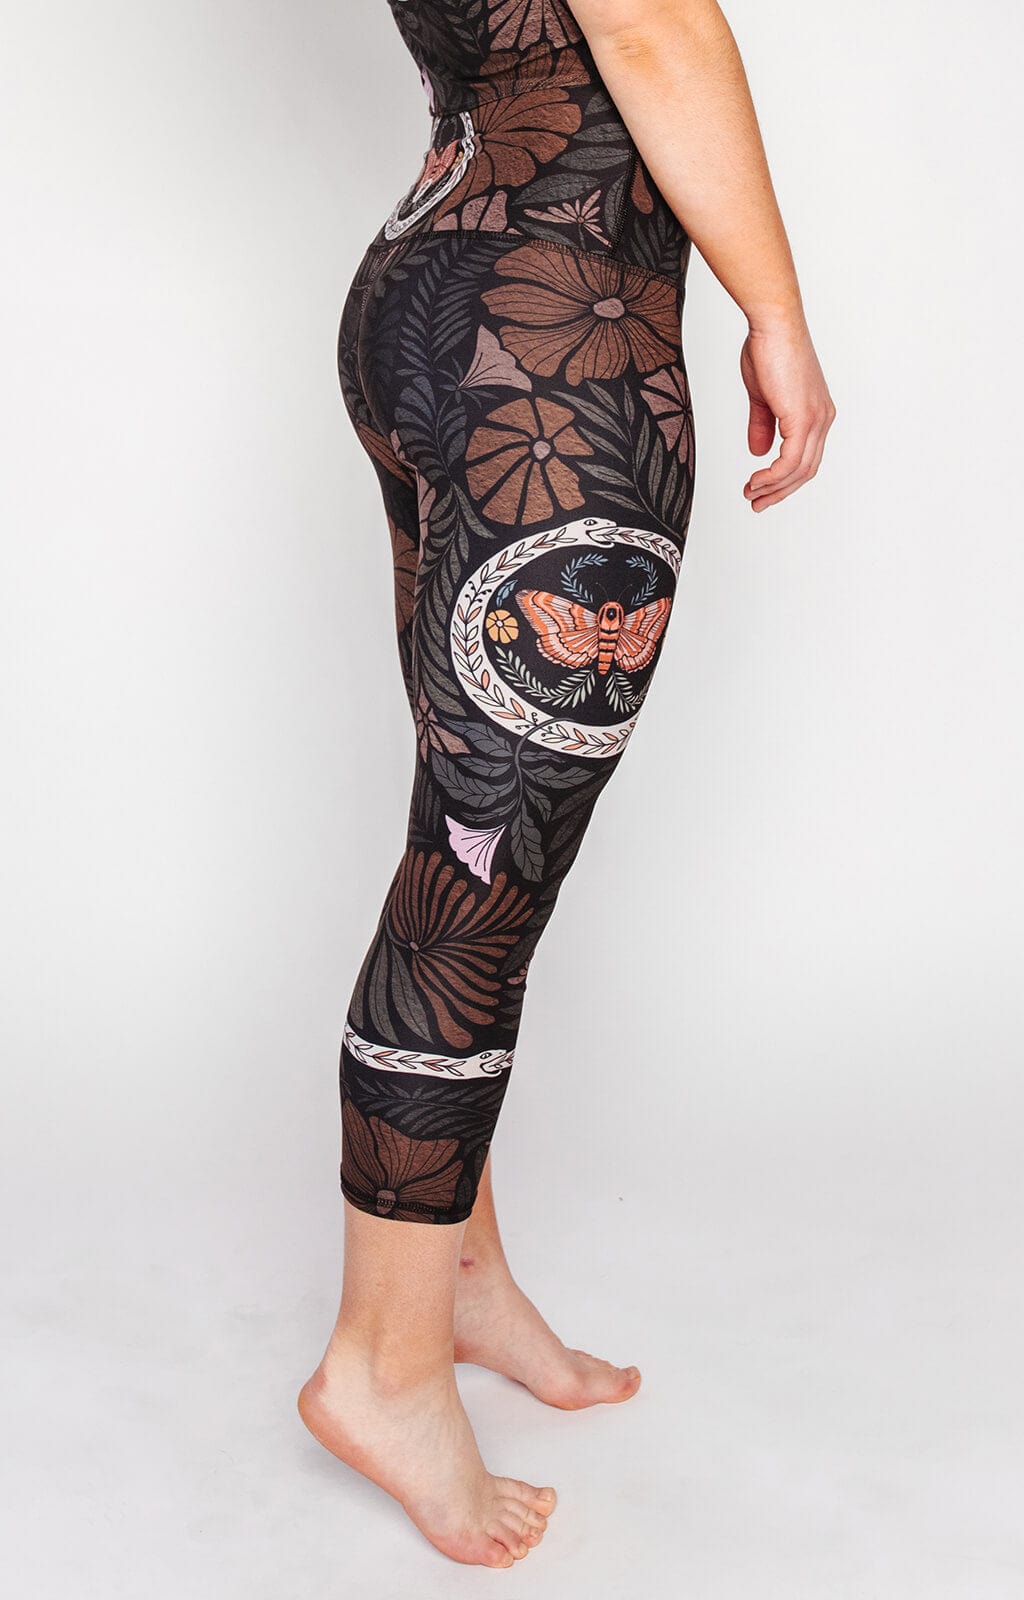 Ouraboros Printed Yoga Crops right